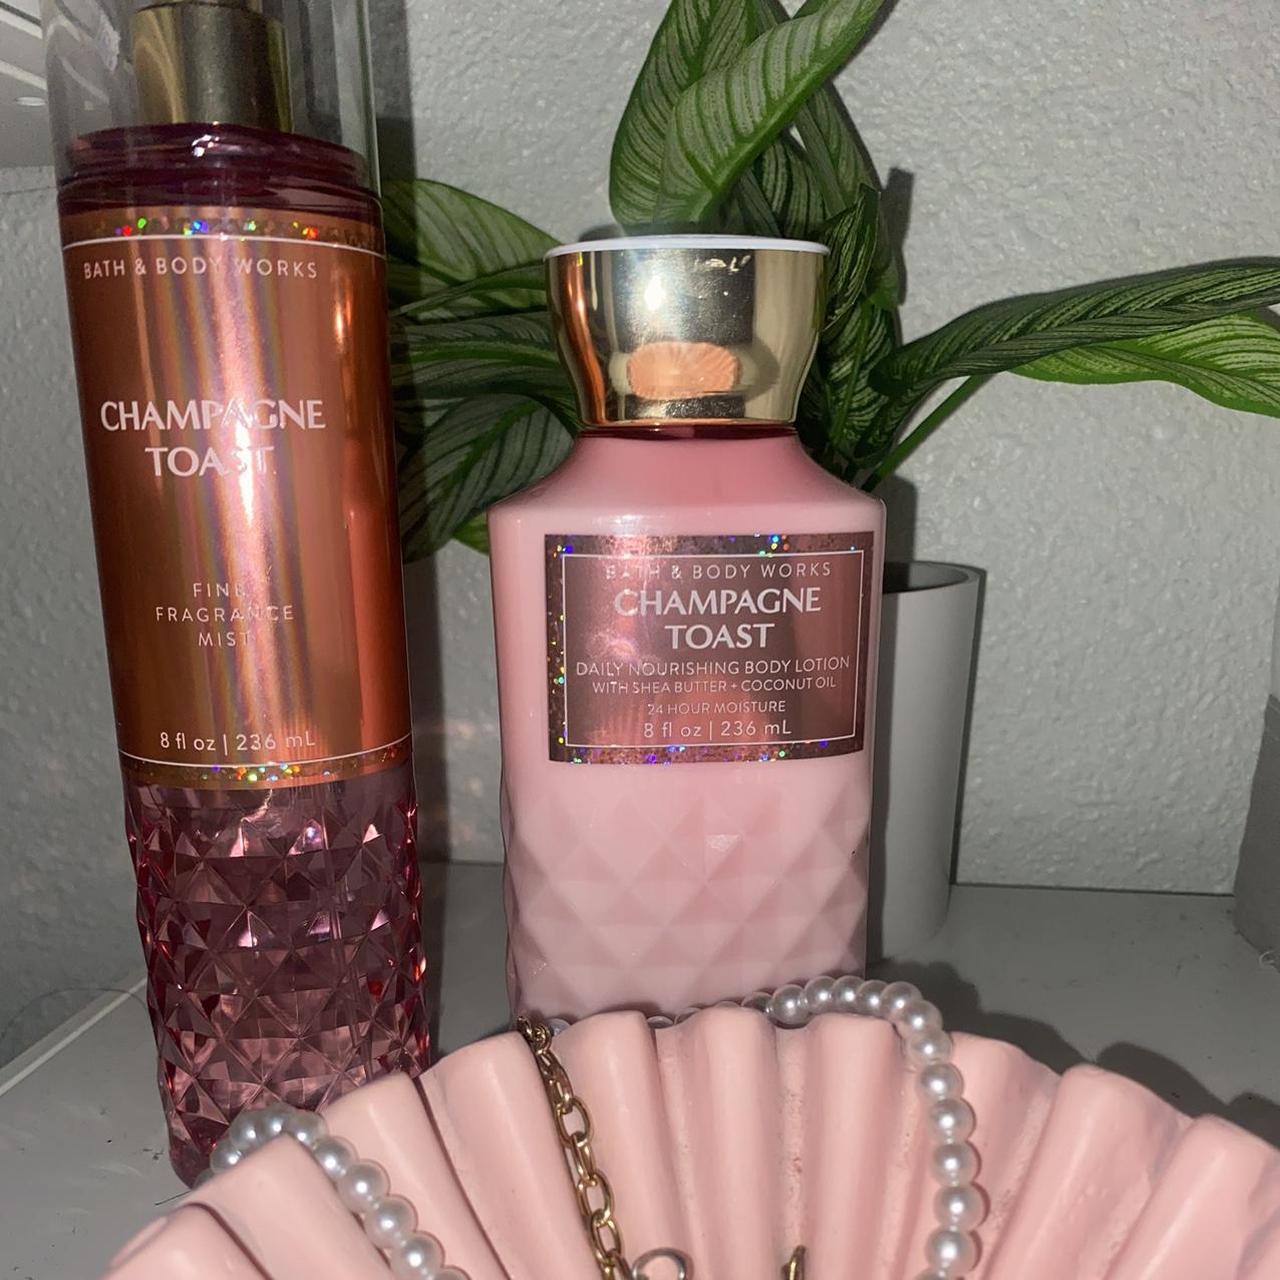 Champagne toast body lotion and fine fragrance mist  - Depop